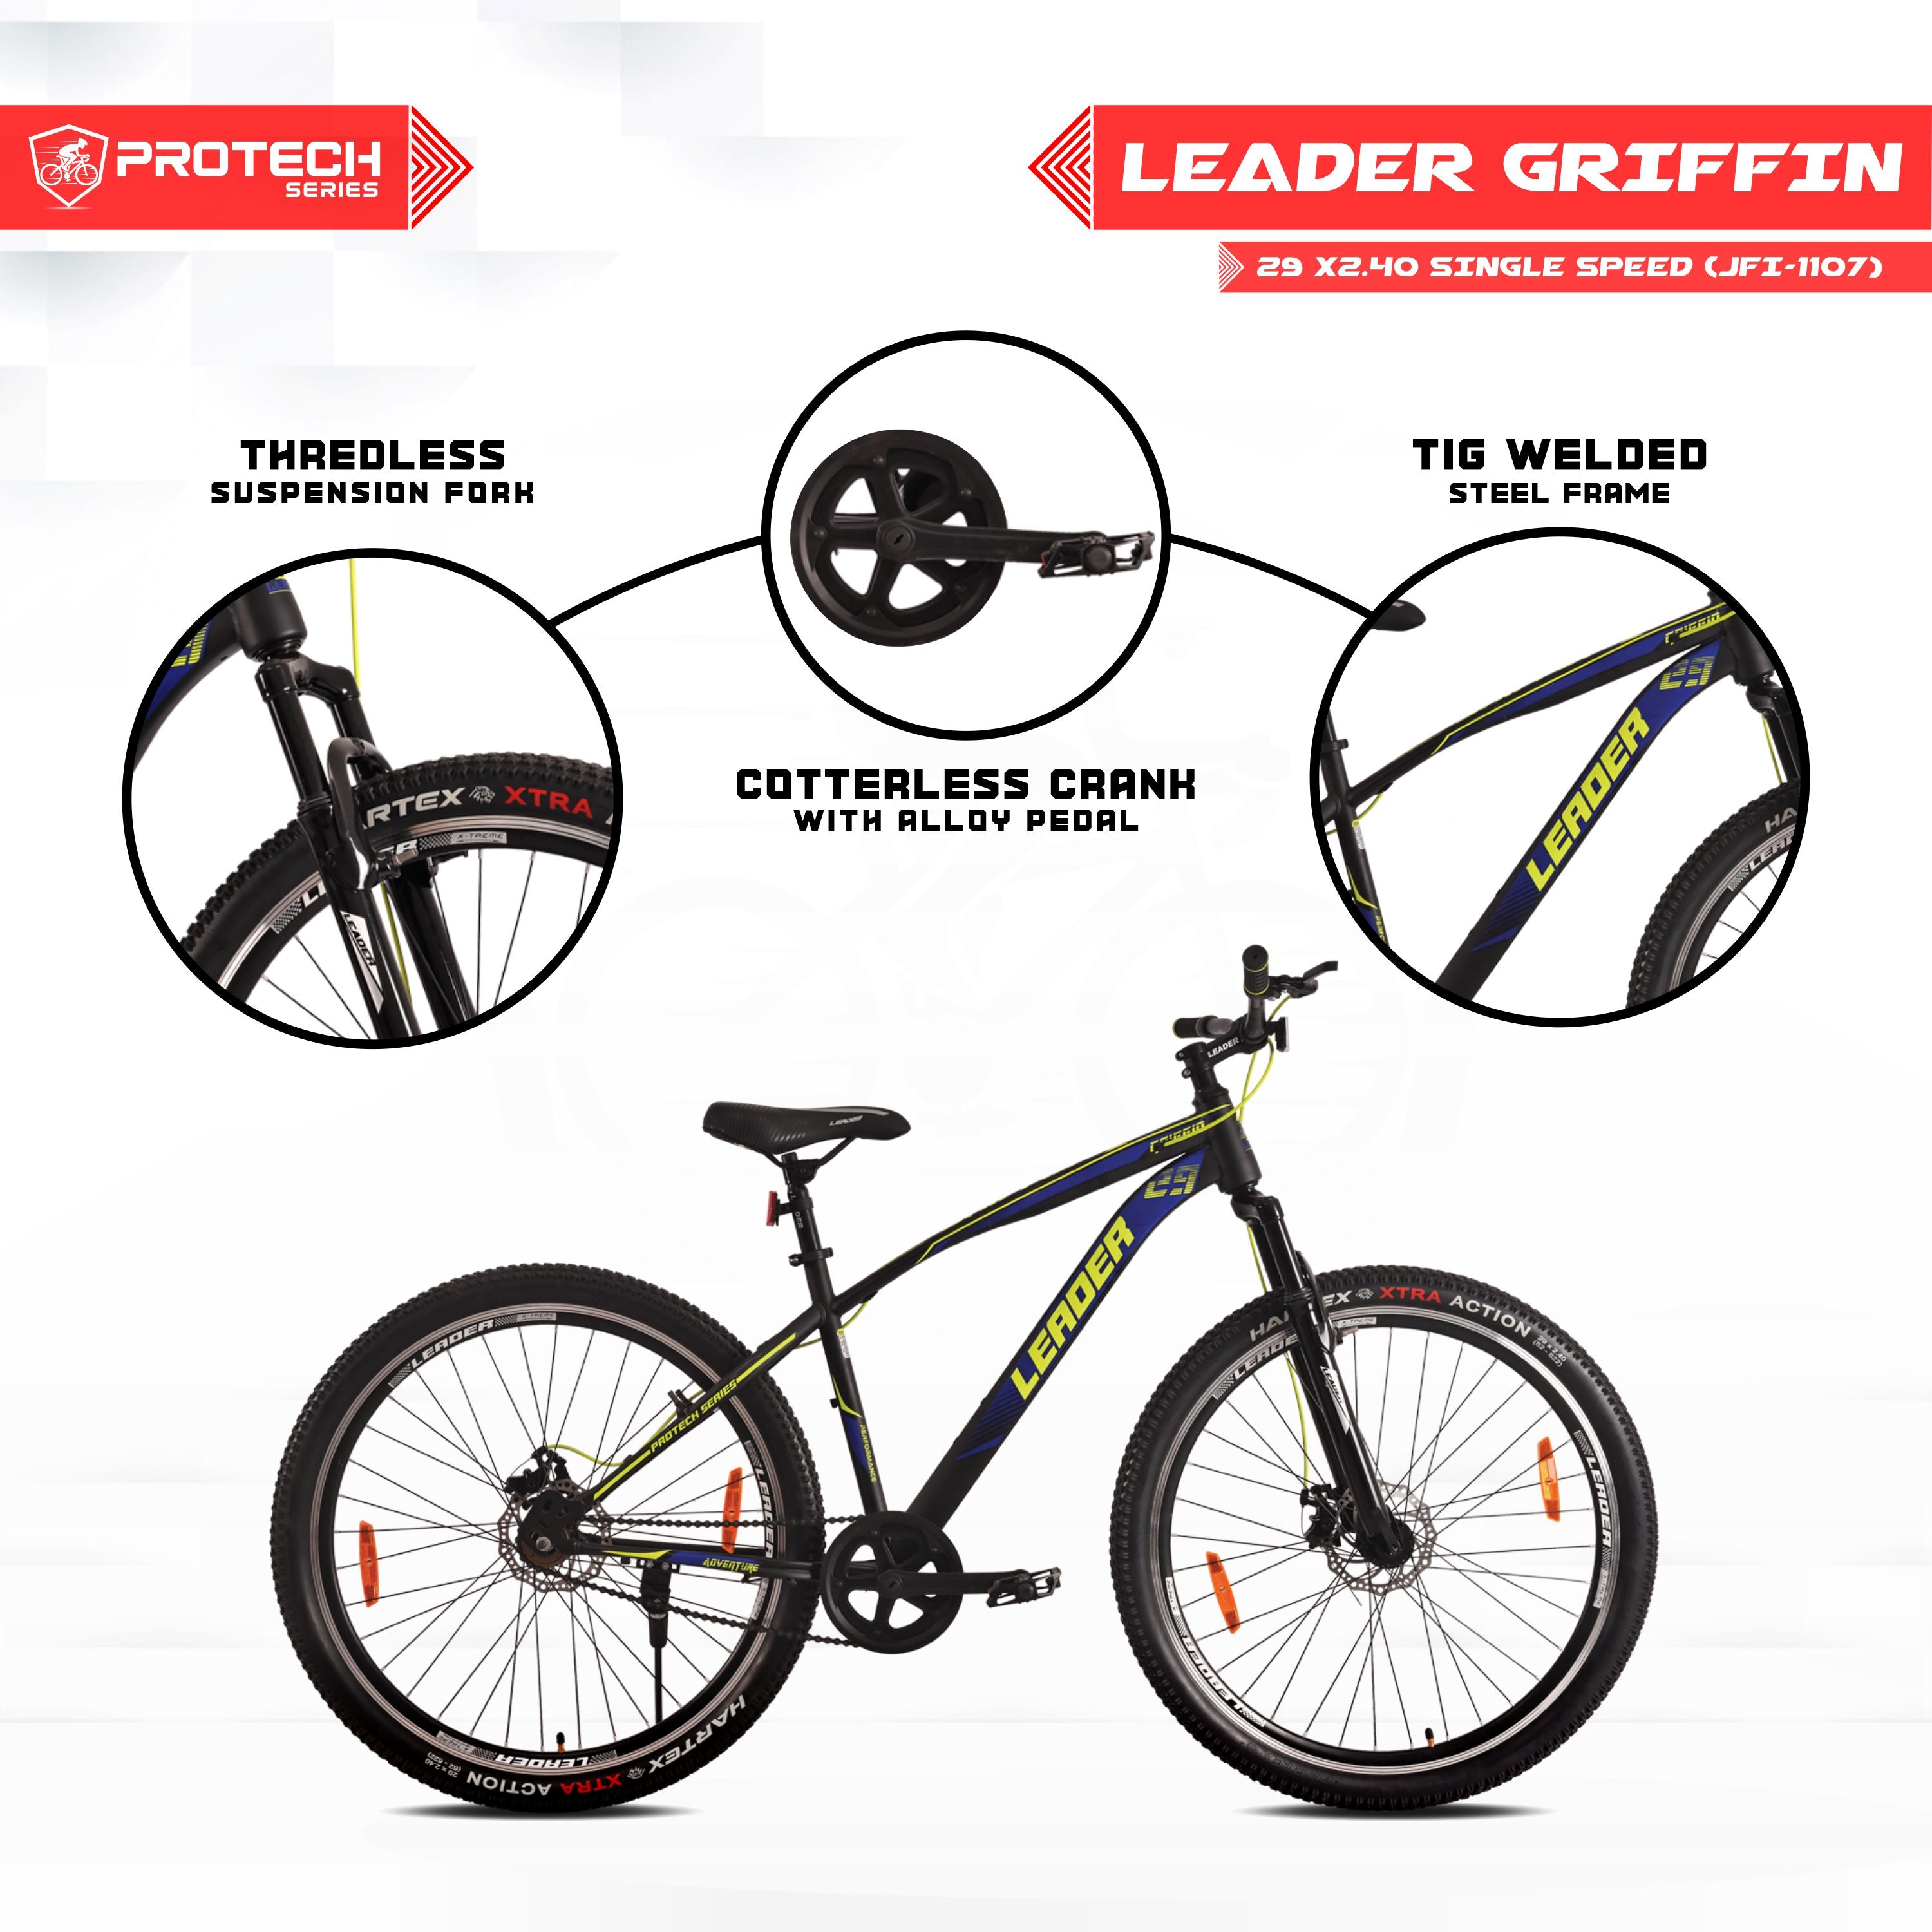 Leader Griffin 29T Single Speed MTB with Dual Disc Brake